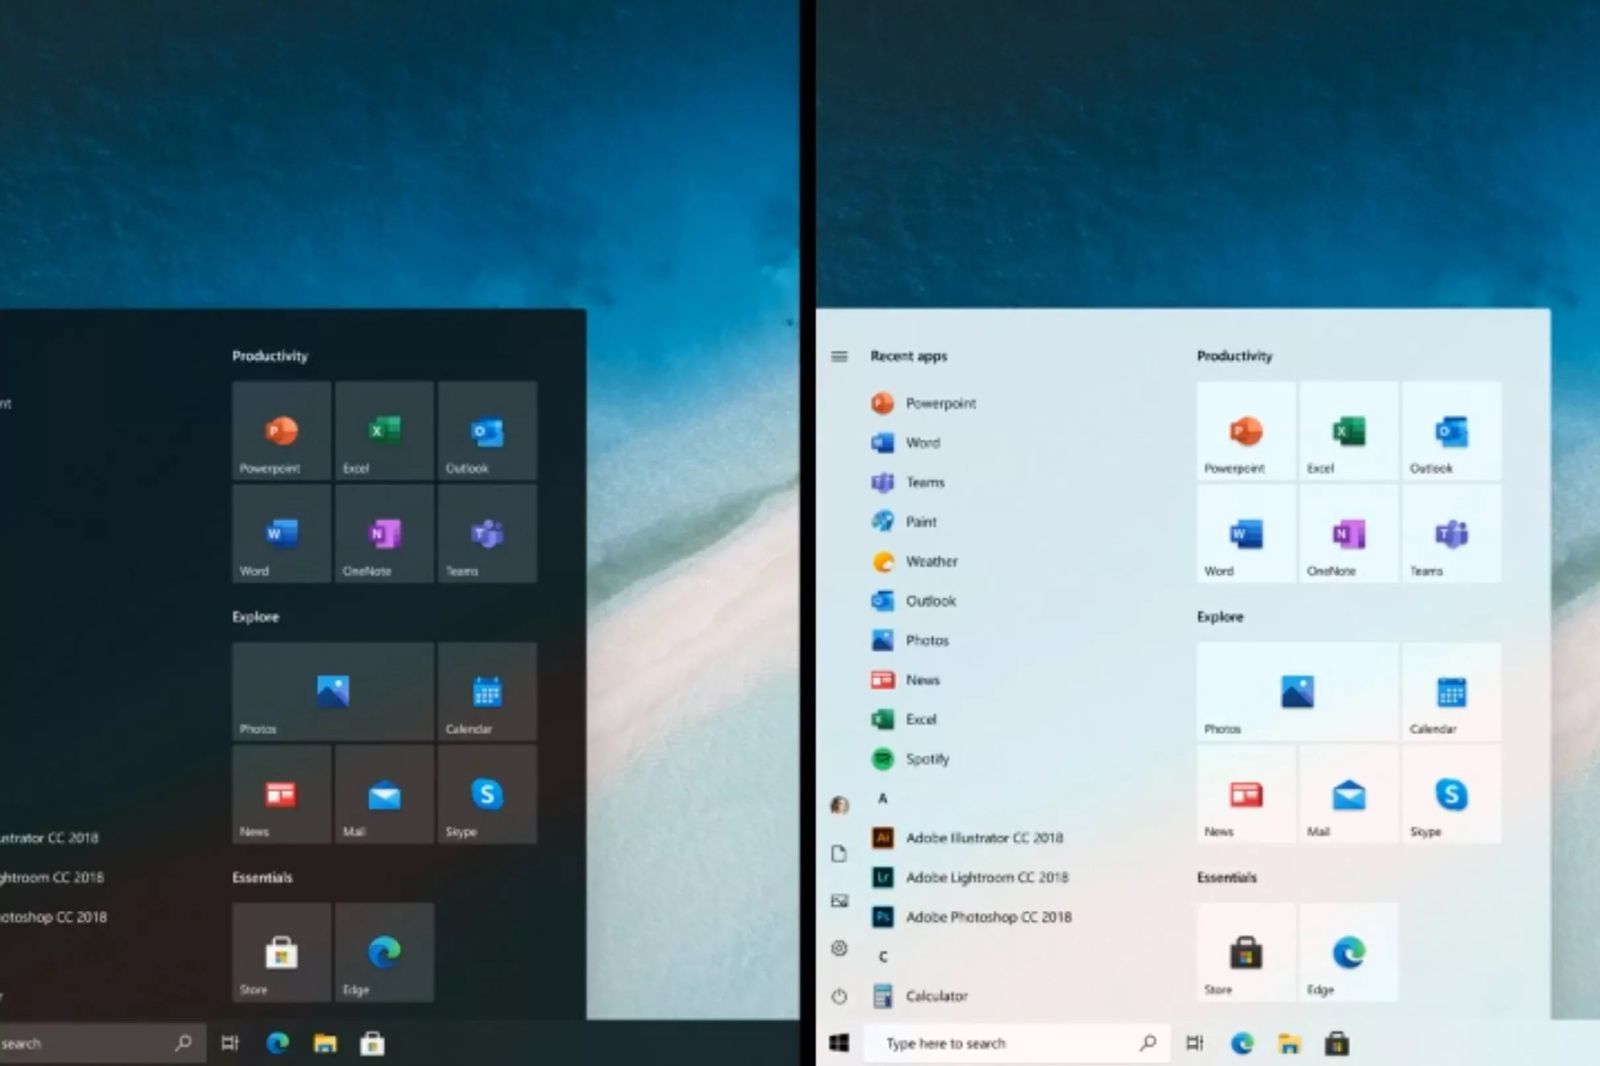 This is what the new Windows 10 Start menu looks like image 2